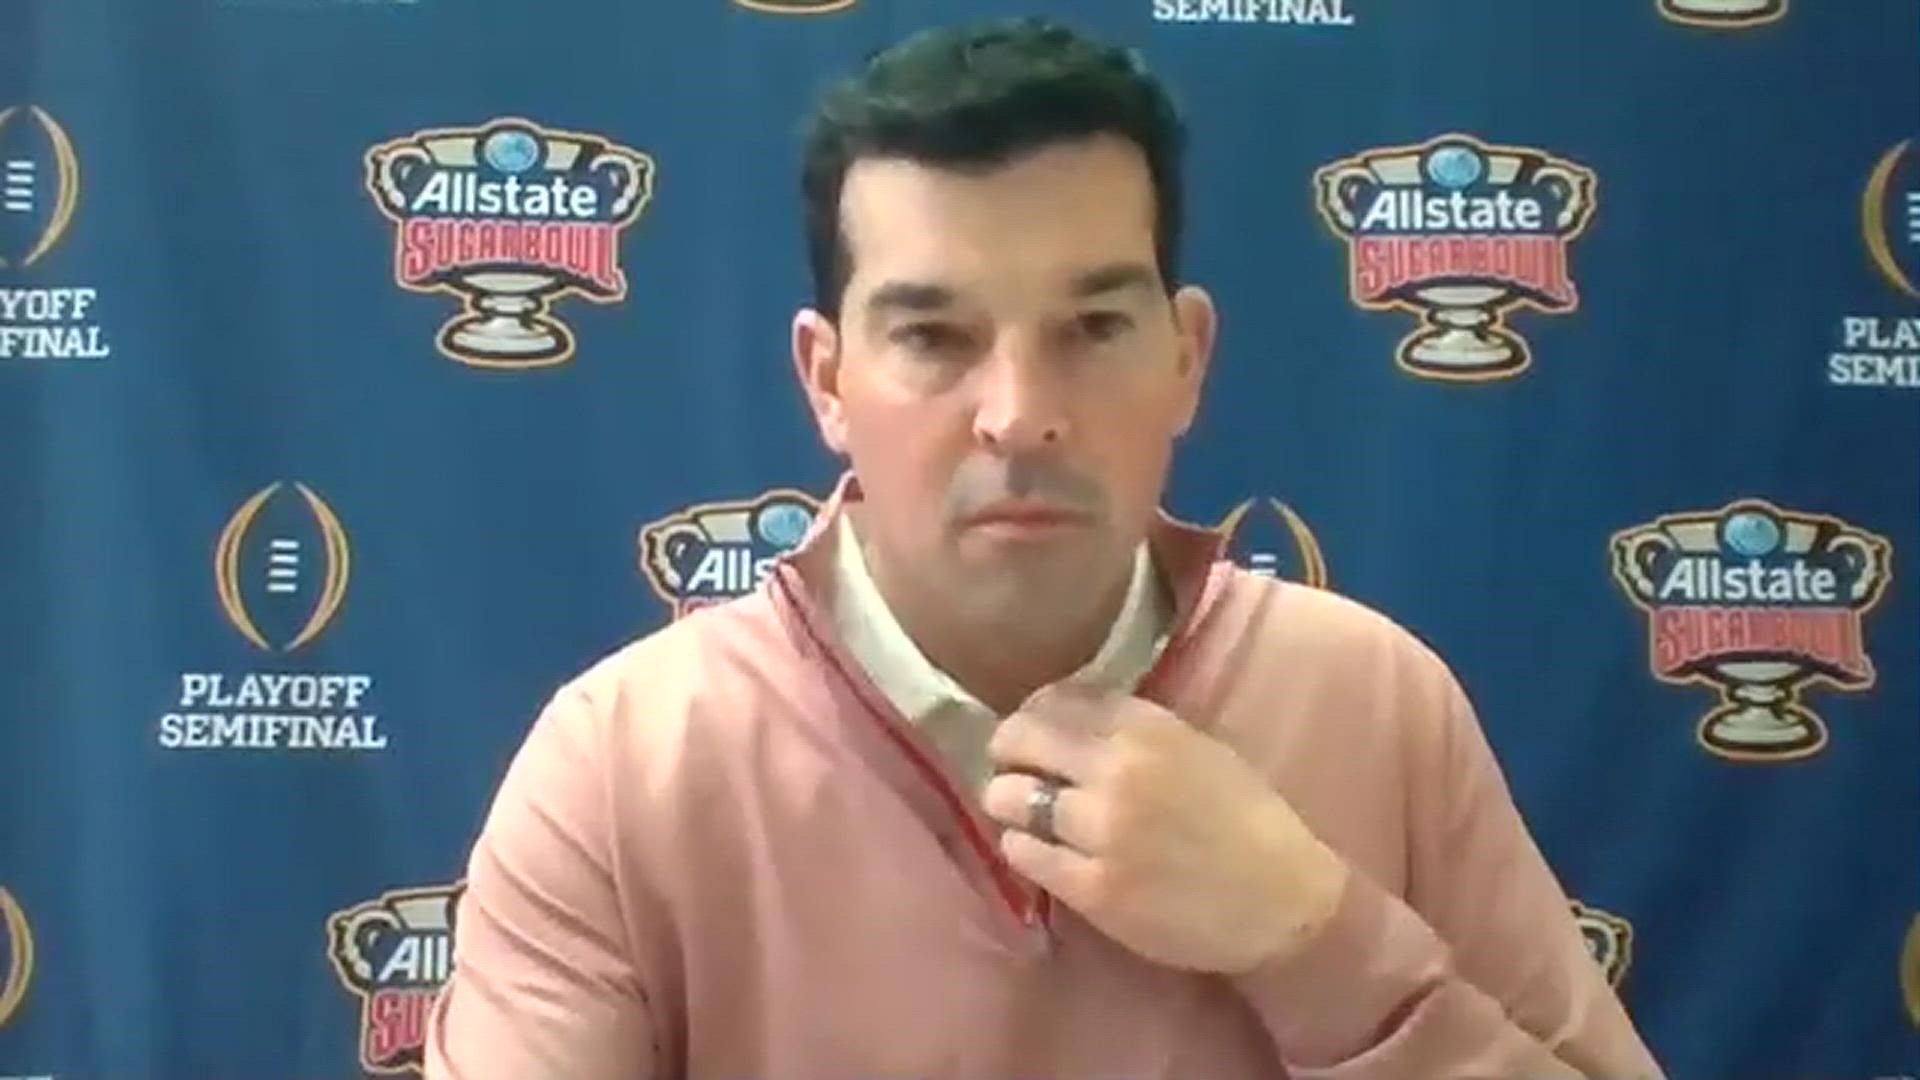 Head coach Ryan Day discusses Ohio State's upcoming matchup against Clemson in the Sugar Bowl.